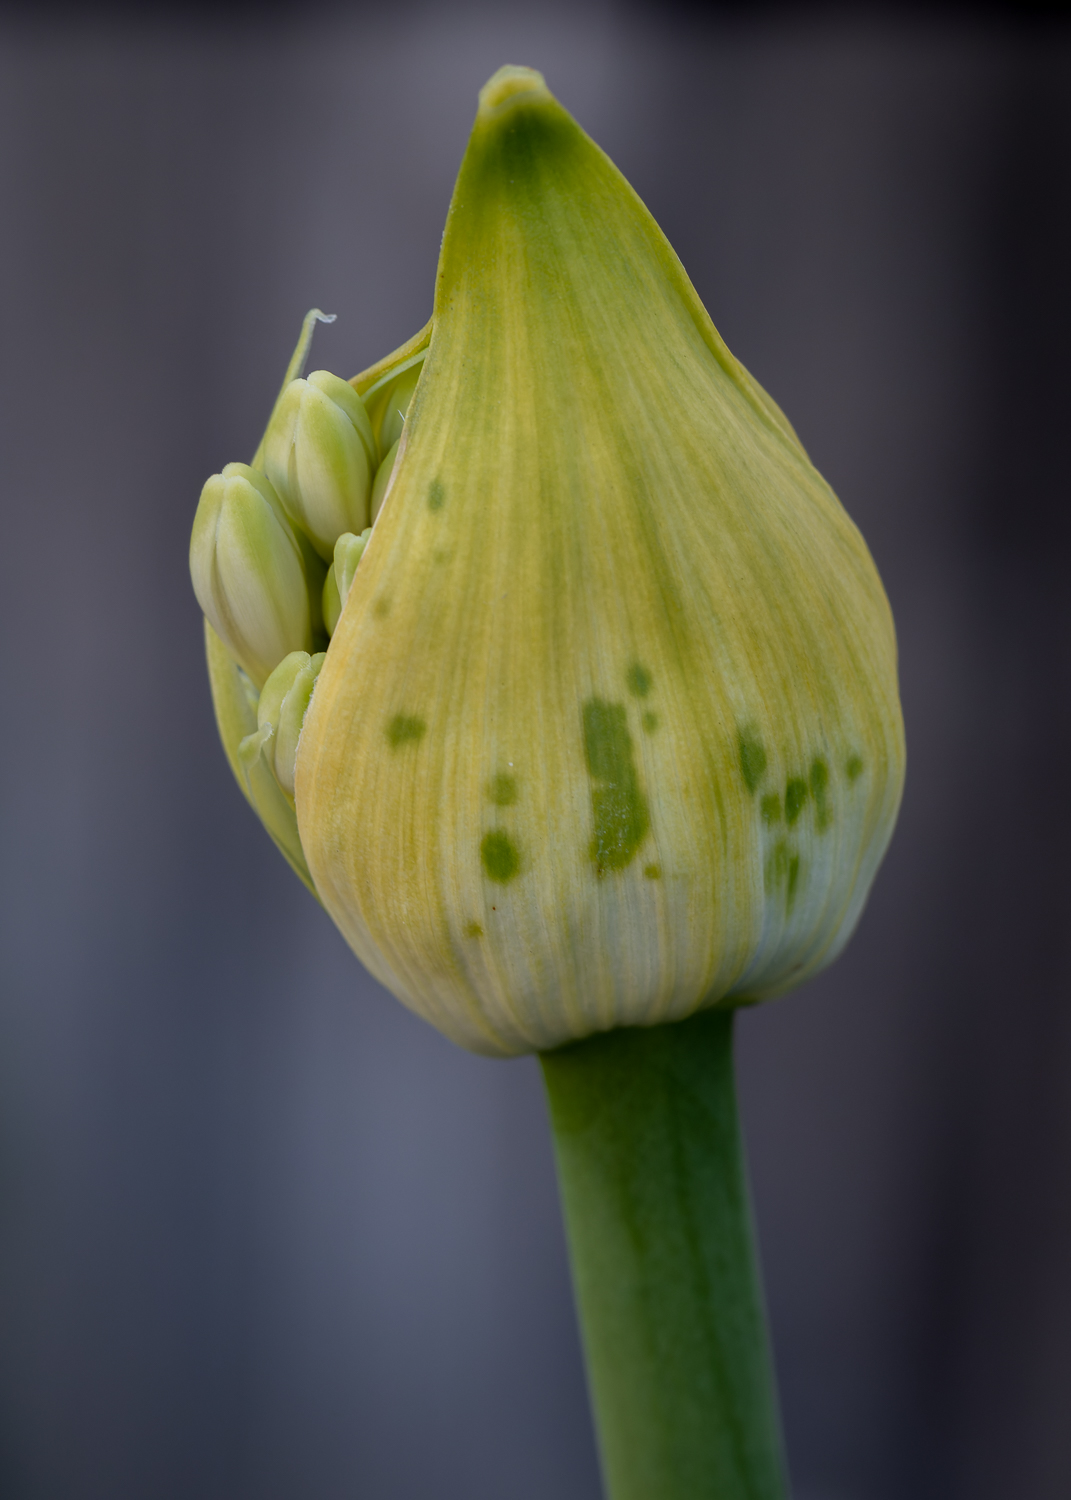 An agapanthus bud bursting into flower. The capsule has green dots on it